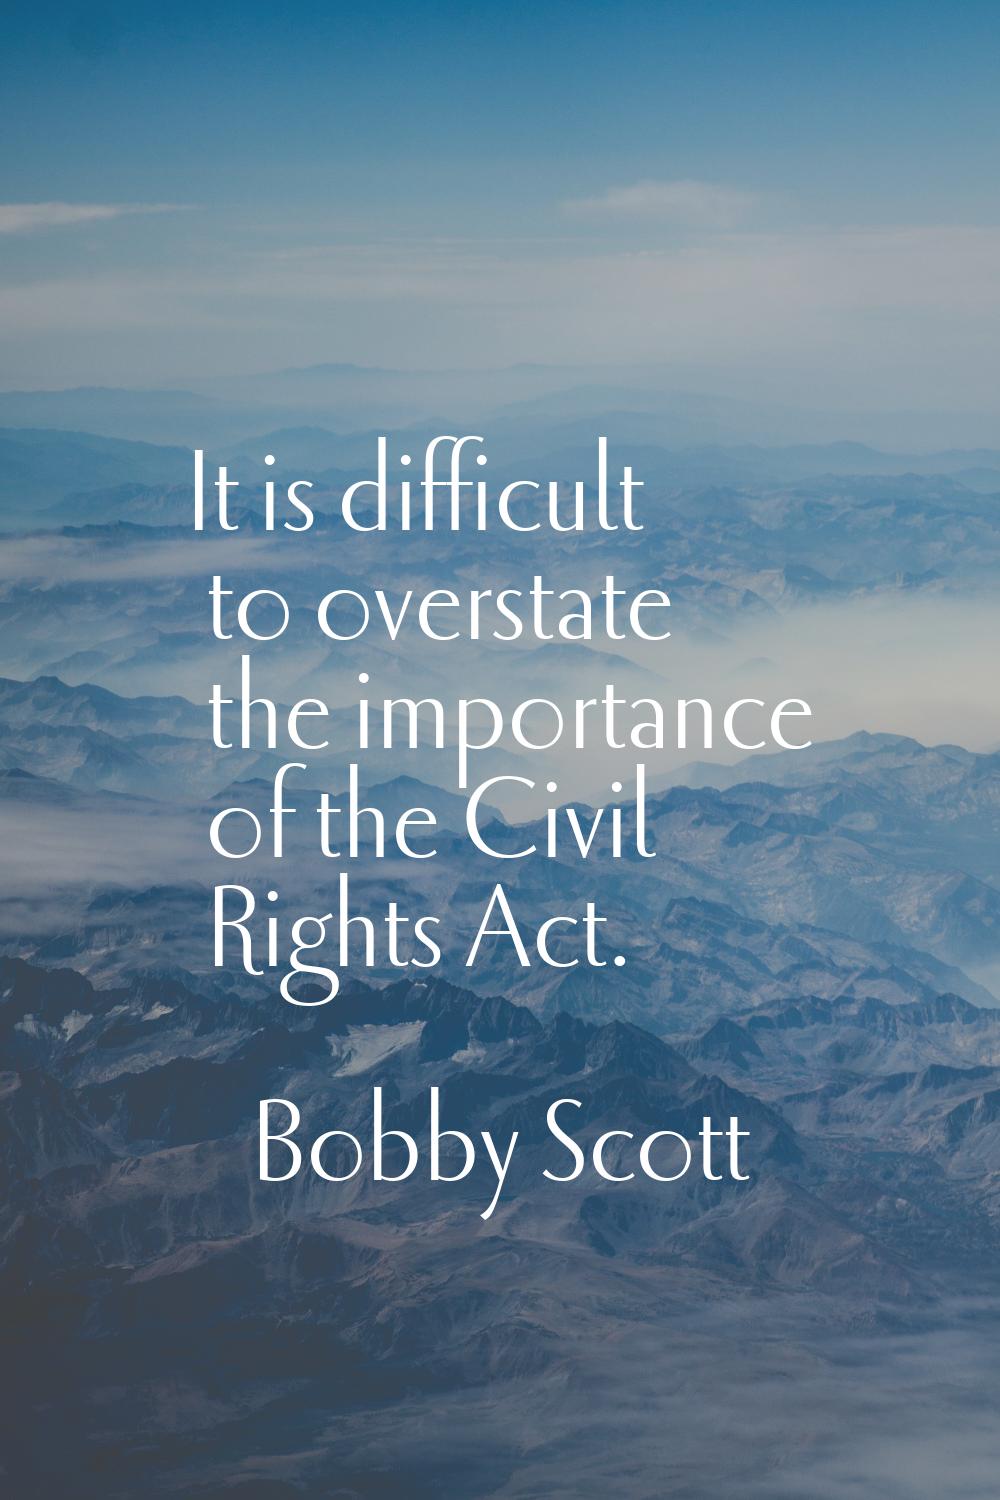 It is difficult to overstate the importance of the Civil Rights Act.